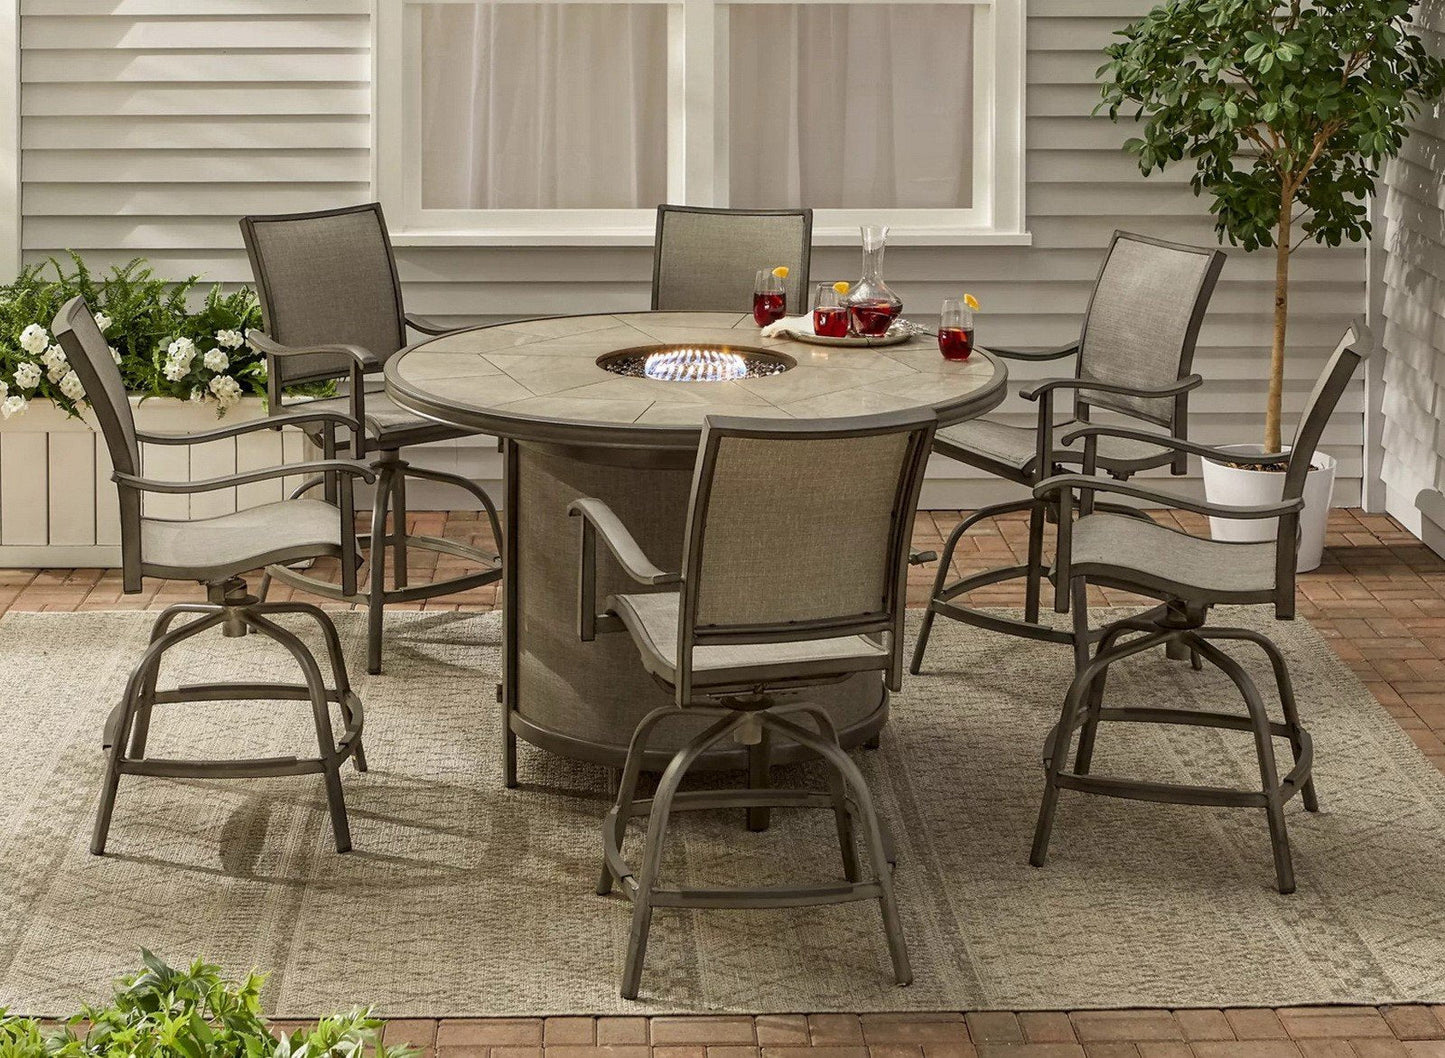 Rock Landing 7-Pc. High Dining Set with Fire Pit